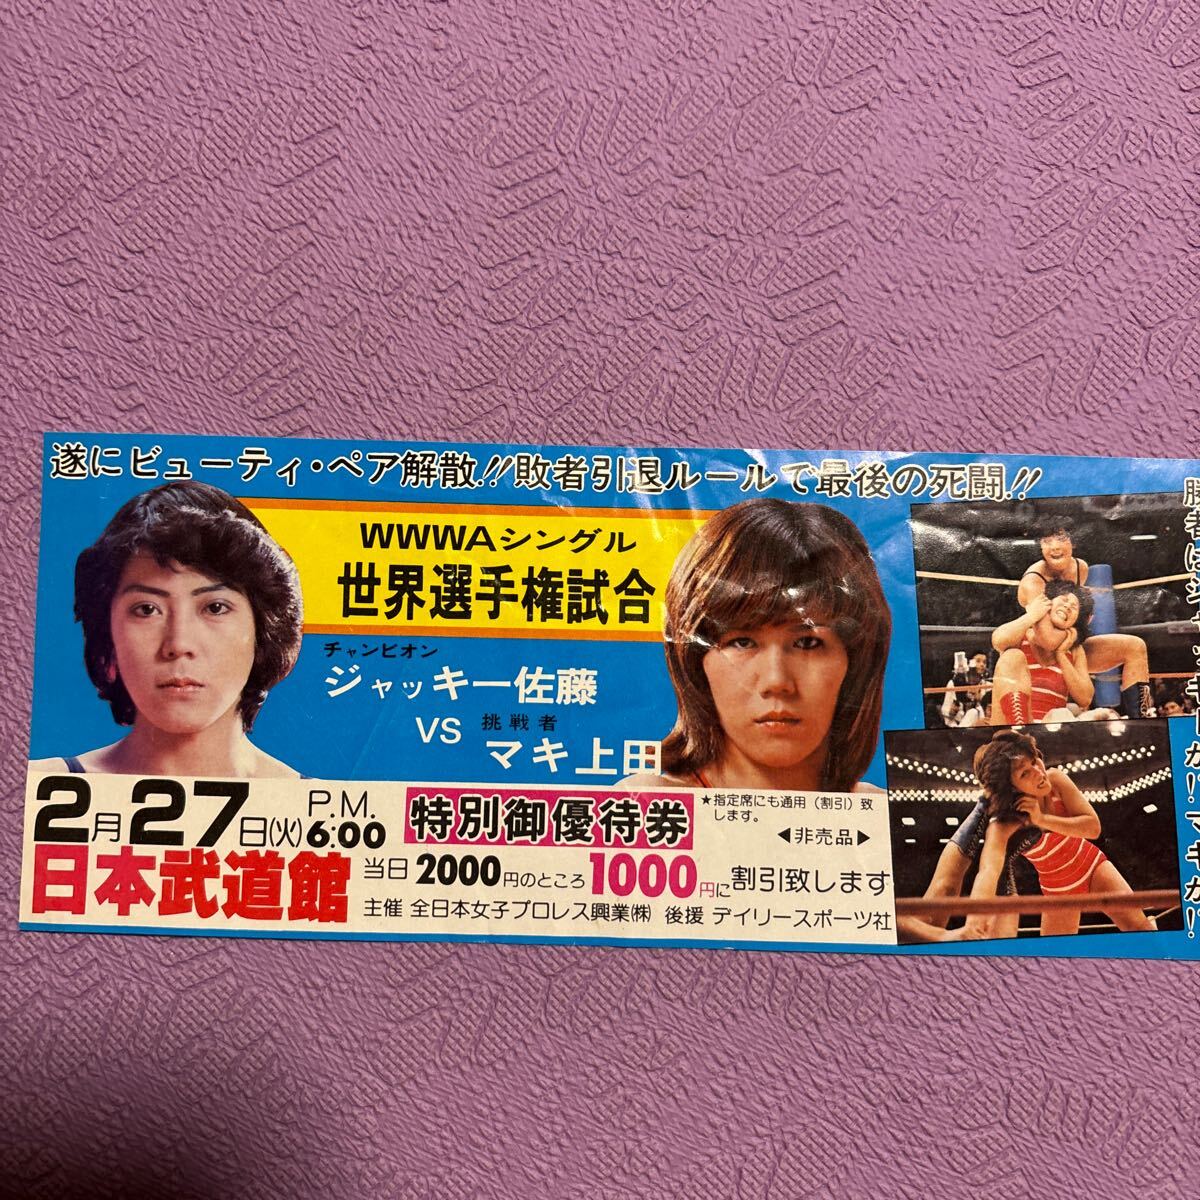  ultra rare! all-Japan women's professional wrestling beauty pair against decision complimentary ticket 